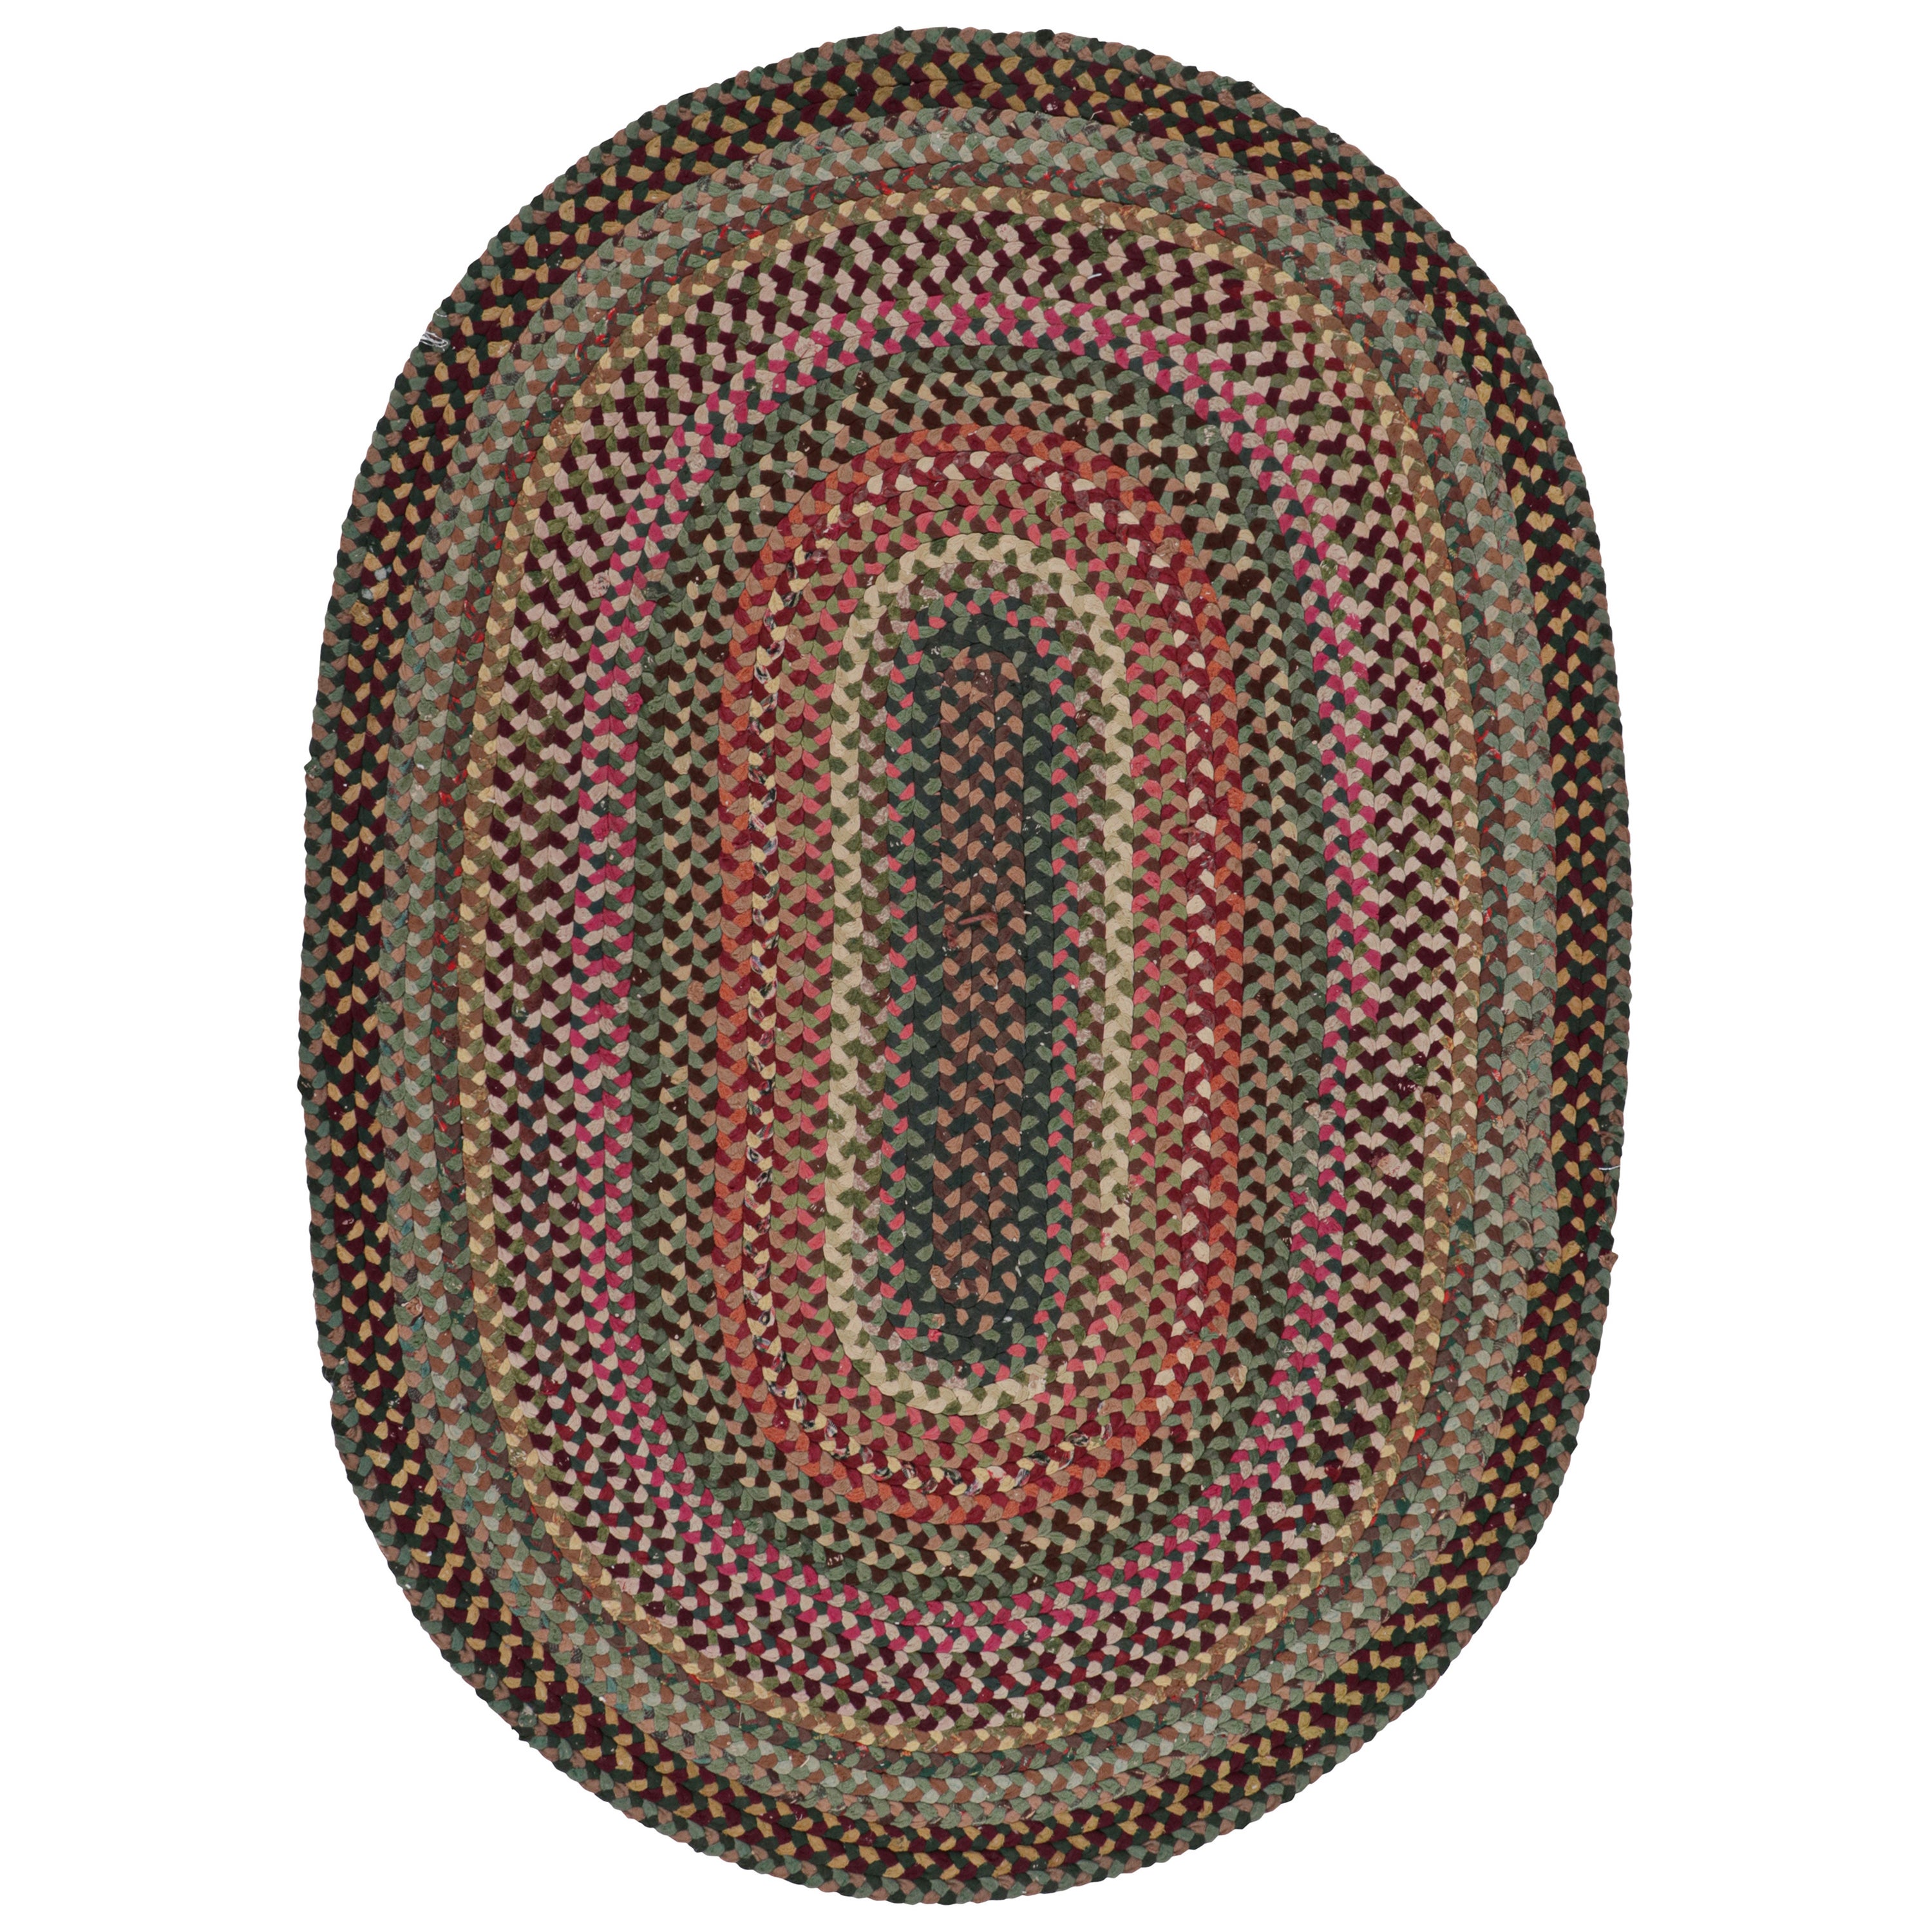 Antique Hooked Oval Rug with Polychromatic Braided Stripes, from Rug & Kilim For Sale